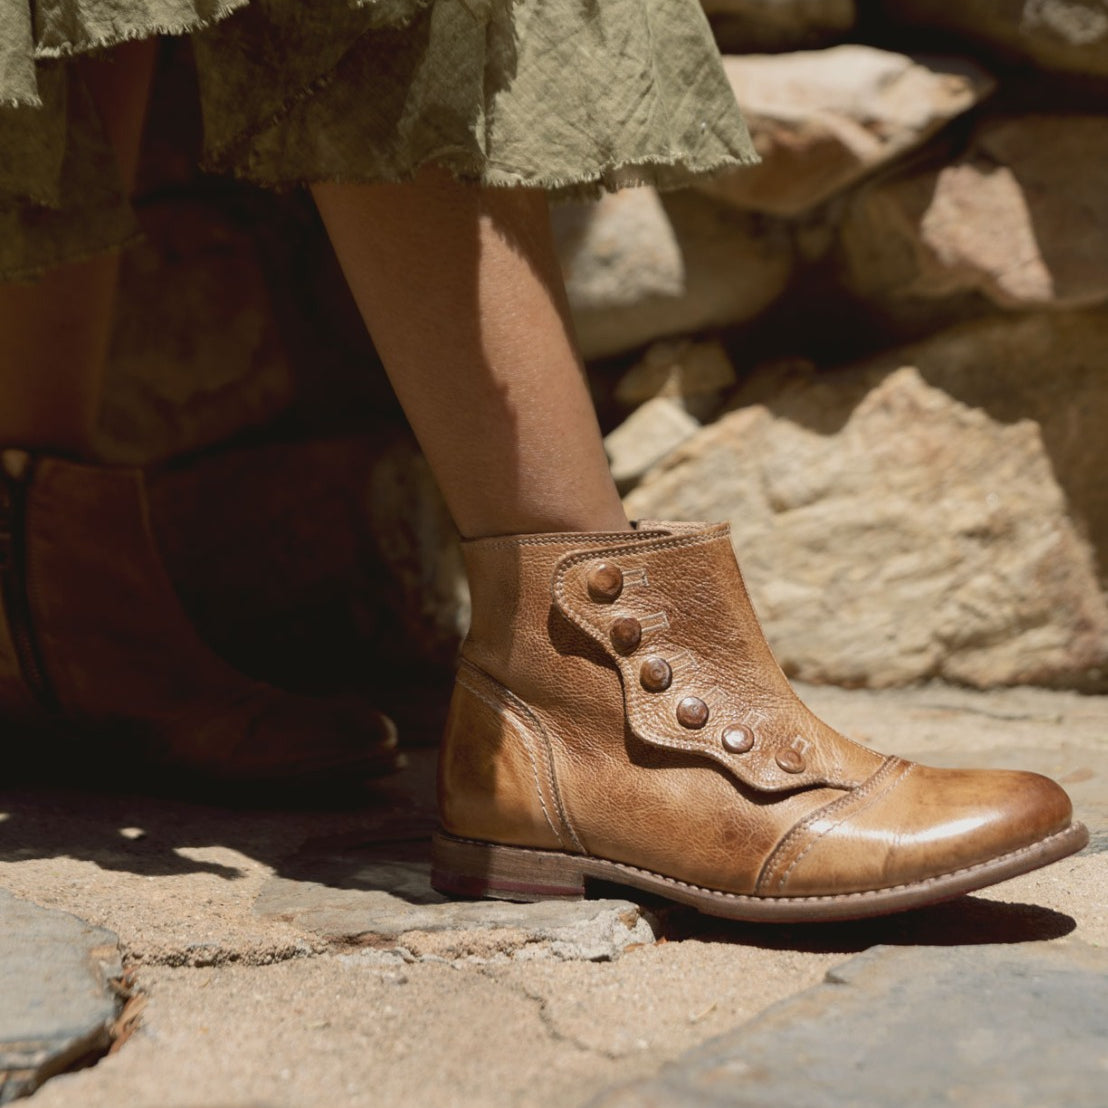 A woman's feet in a pair of Oak Tree Farms Josephine tan leather booties featuring YKK zippers.